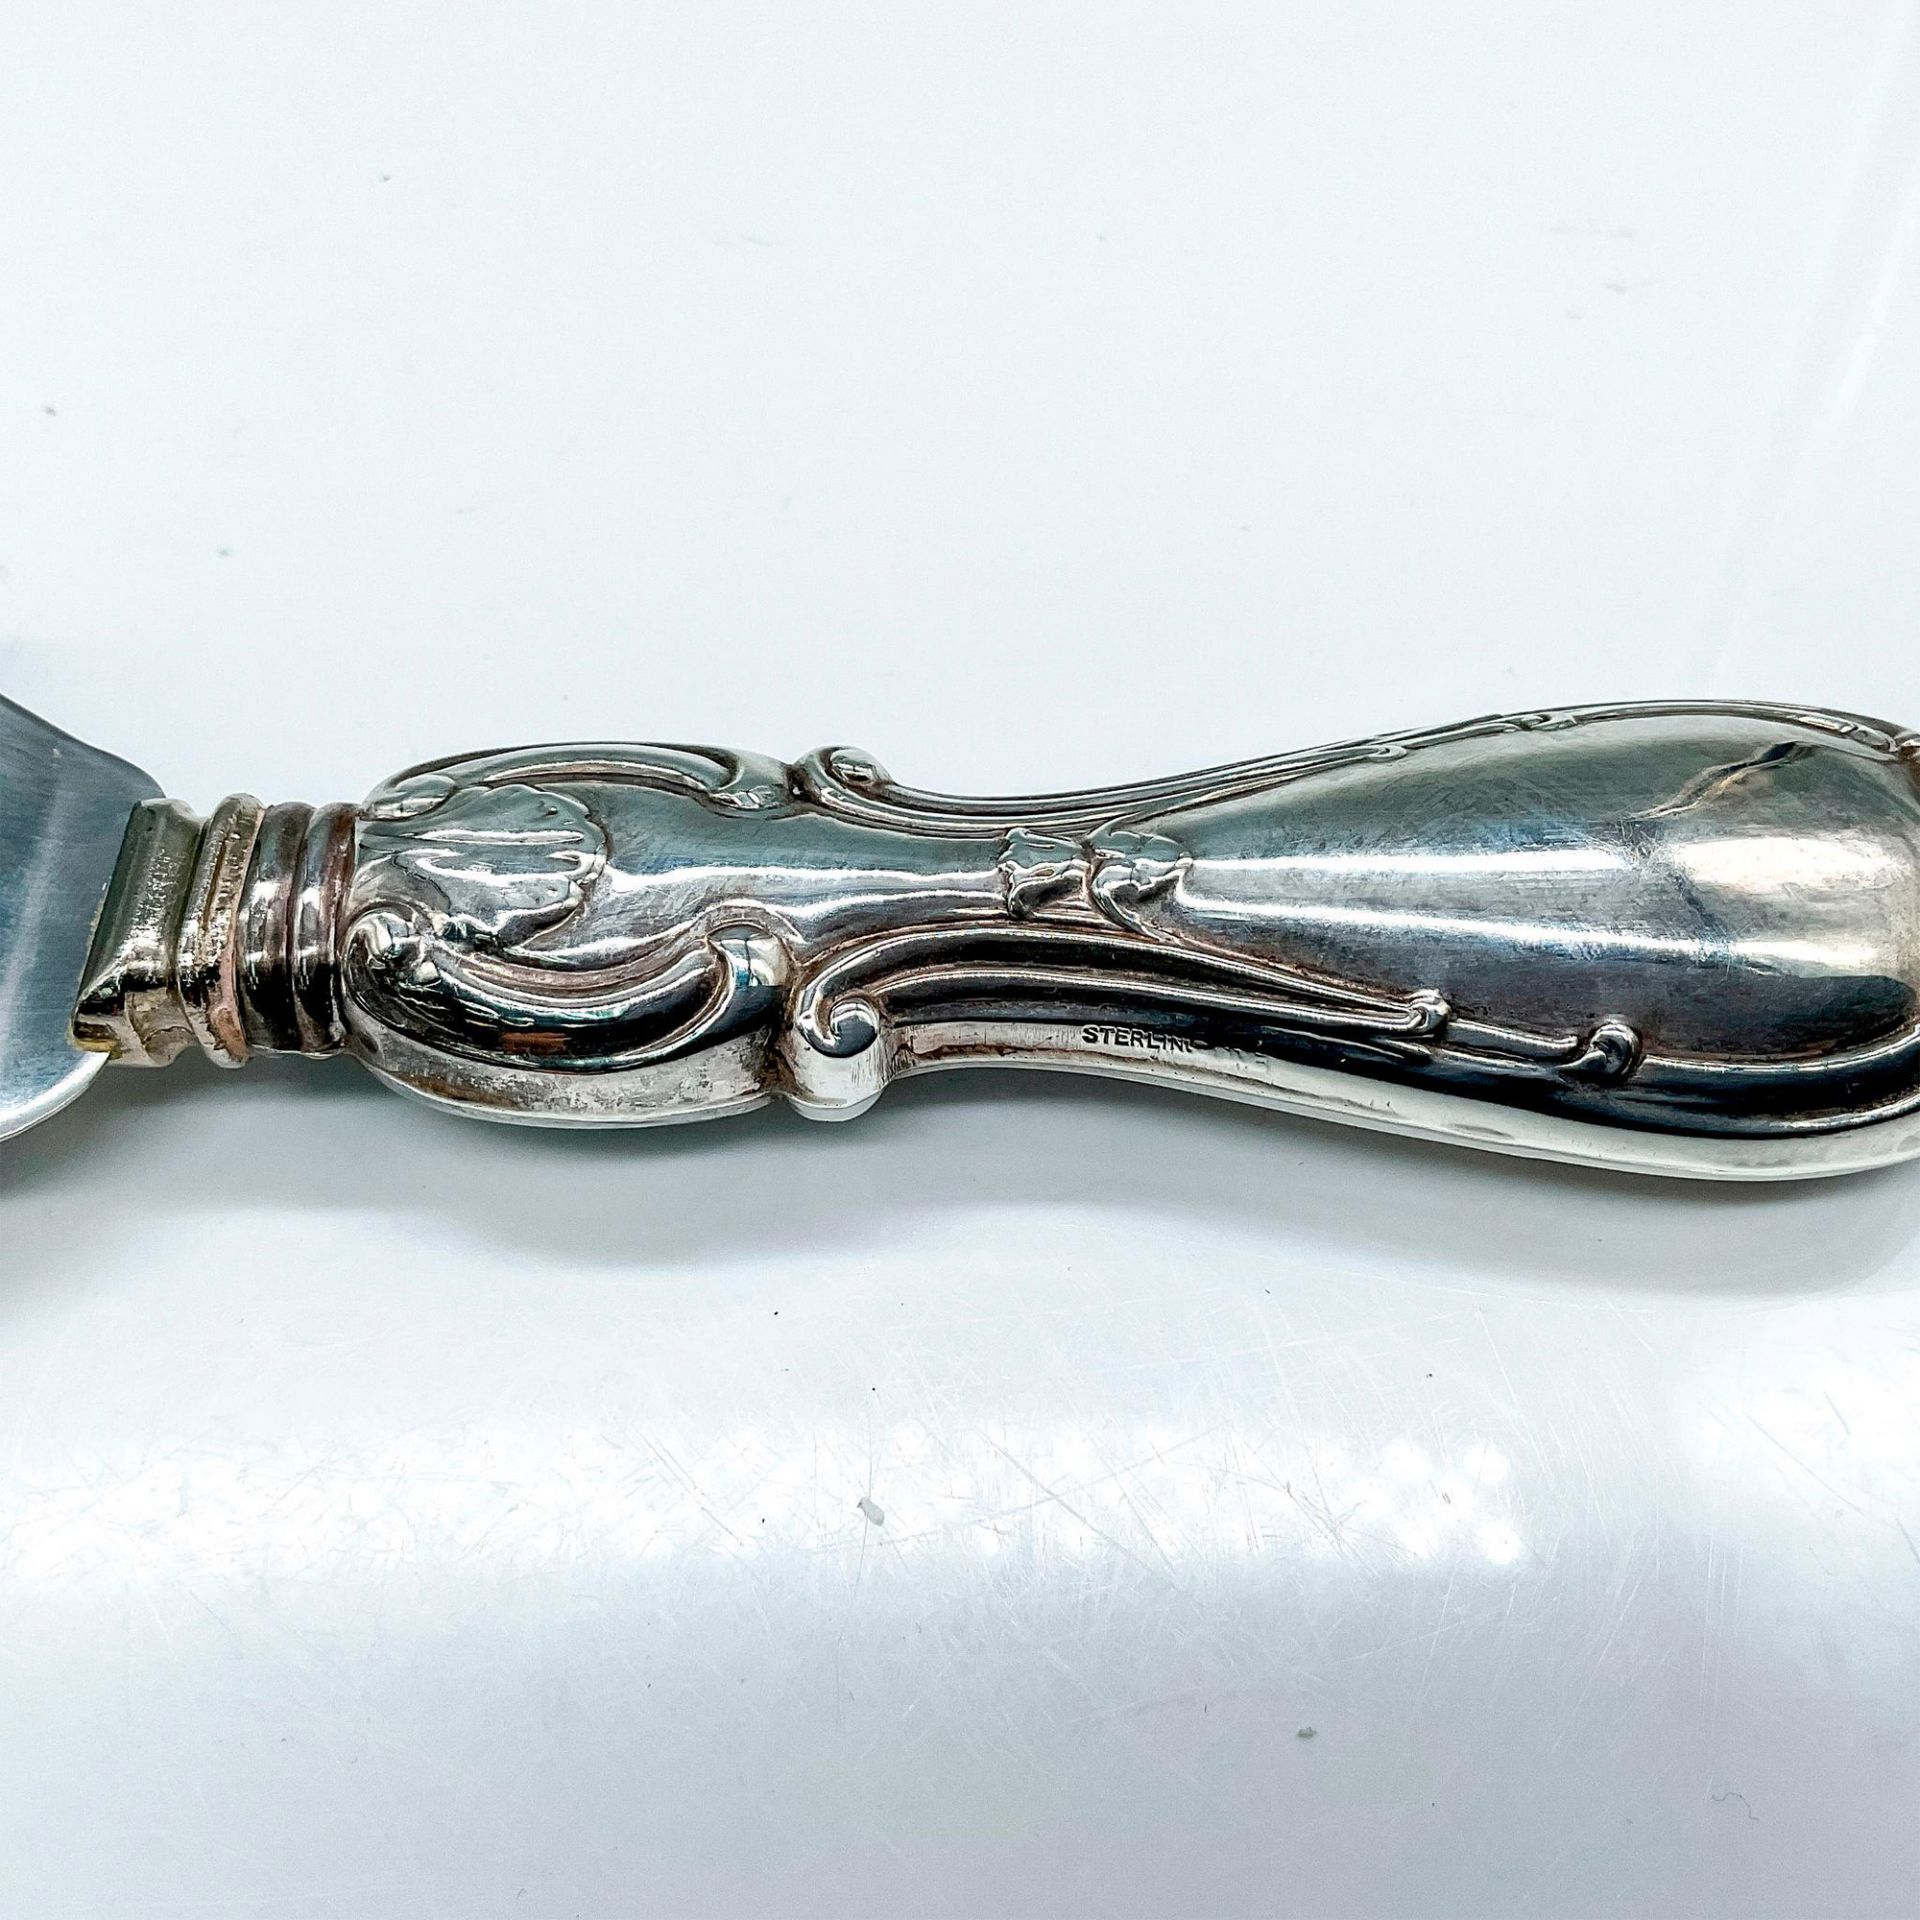 2pc Stainless Steel and Sterling Cake Cutter and Server - Image 3 of 3